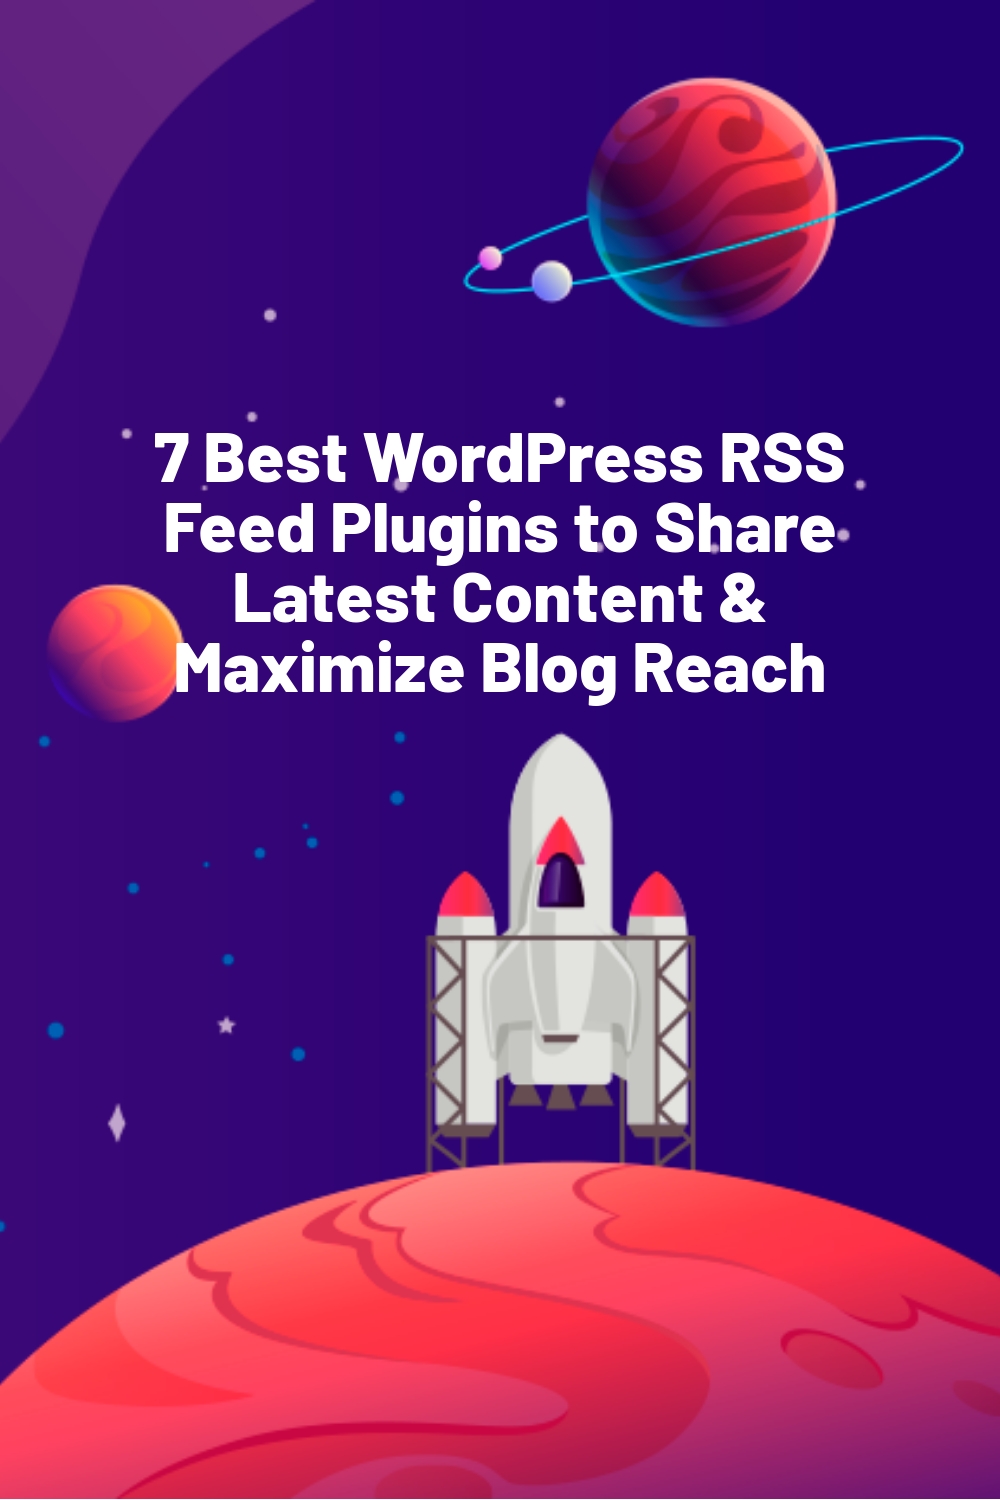 7 Best WordPress RSS Feed Plugins to Share Latest Content & Maximize Blog Reach